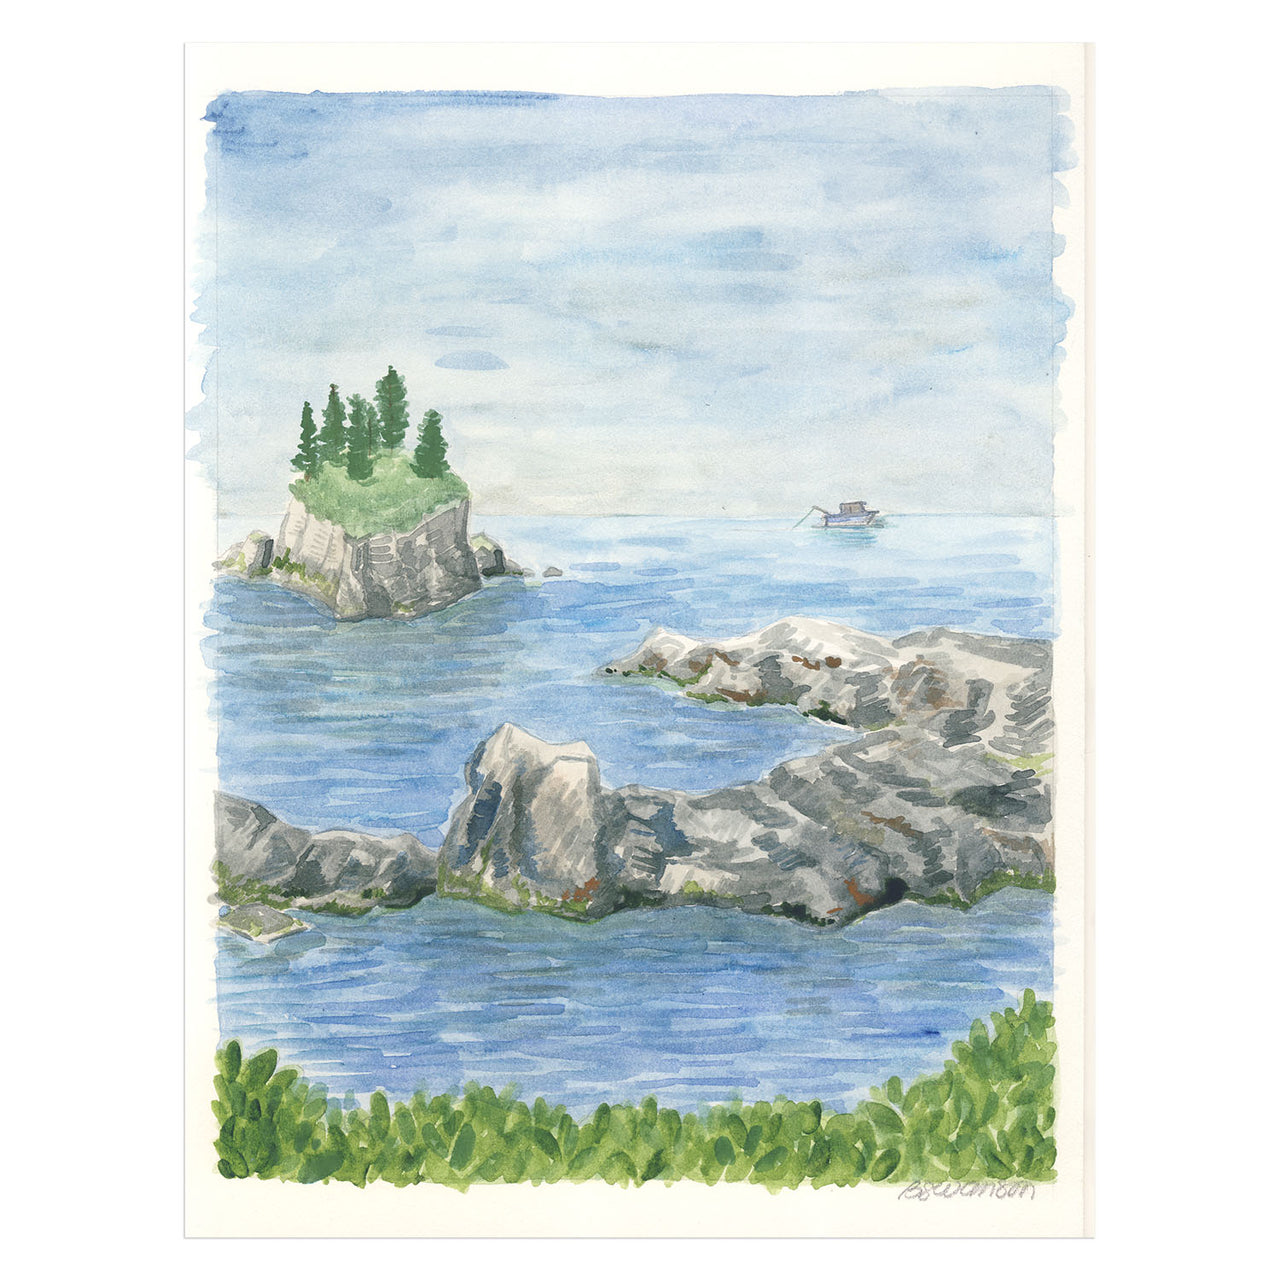 original watercolor painting of a fishing boat off the coast of Vancouver Island